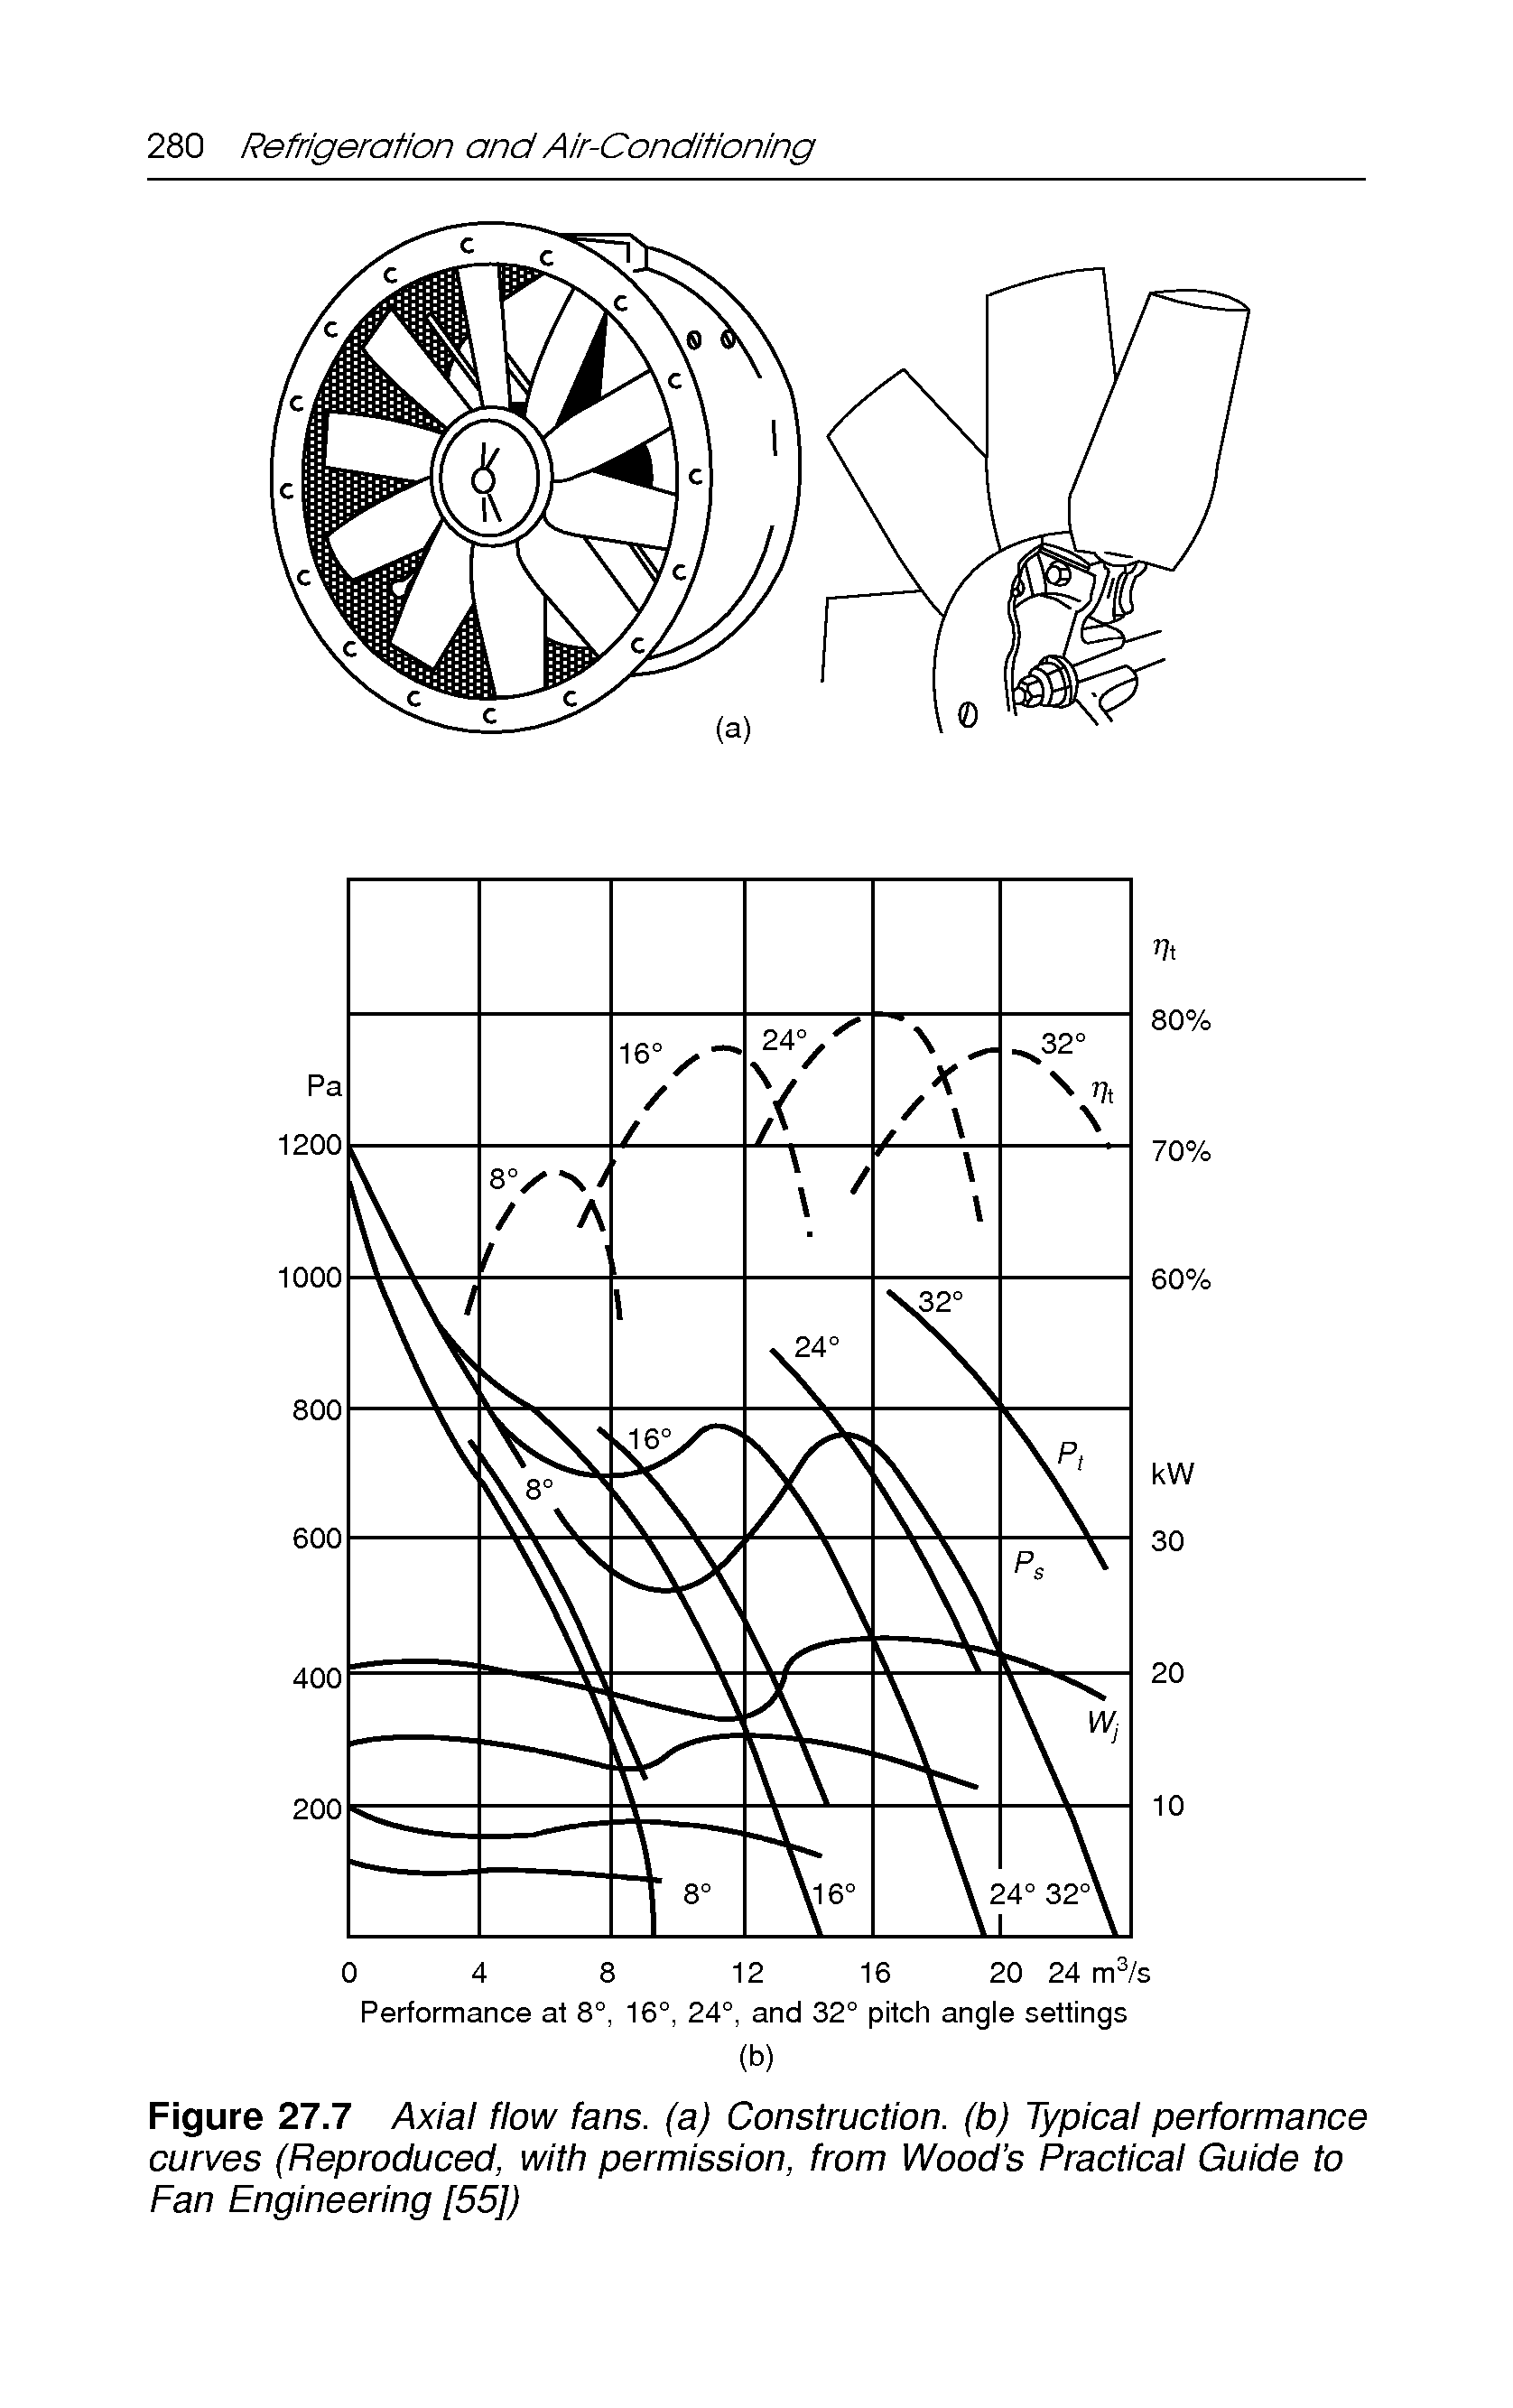 Figure 27.7 Axial flow fans, (a) Construction, (b) Typical performance curves (Reproduced, with permission, from Wood s Practical Guide to Fan Engineering [55])...